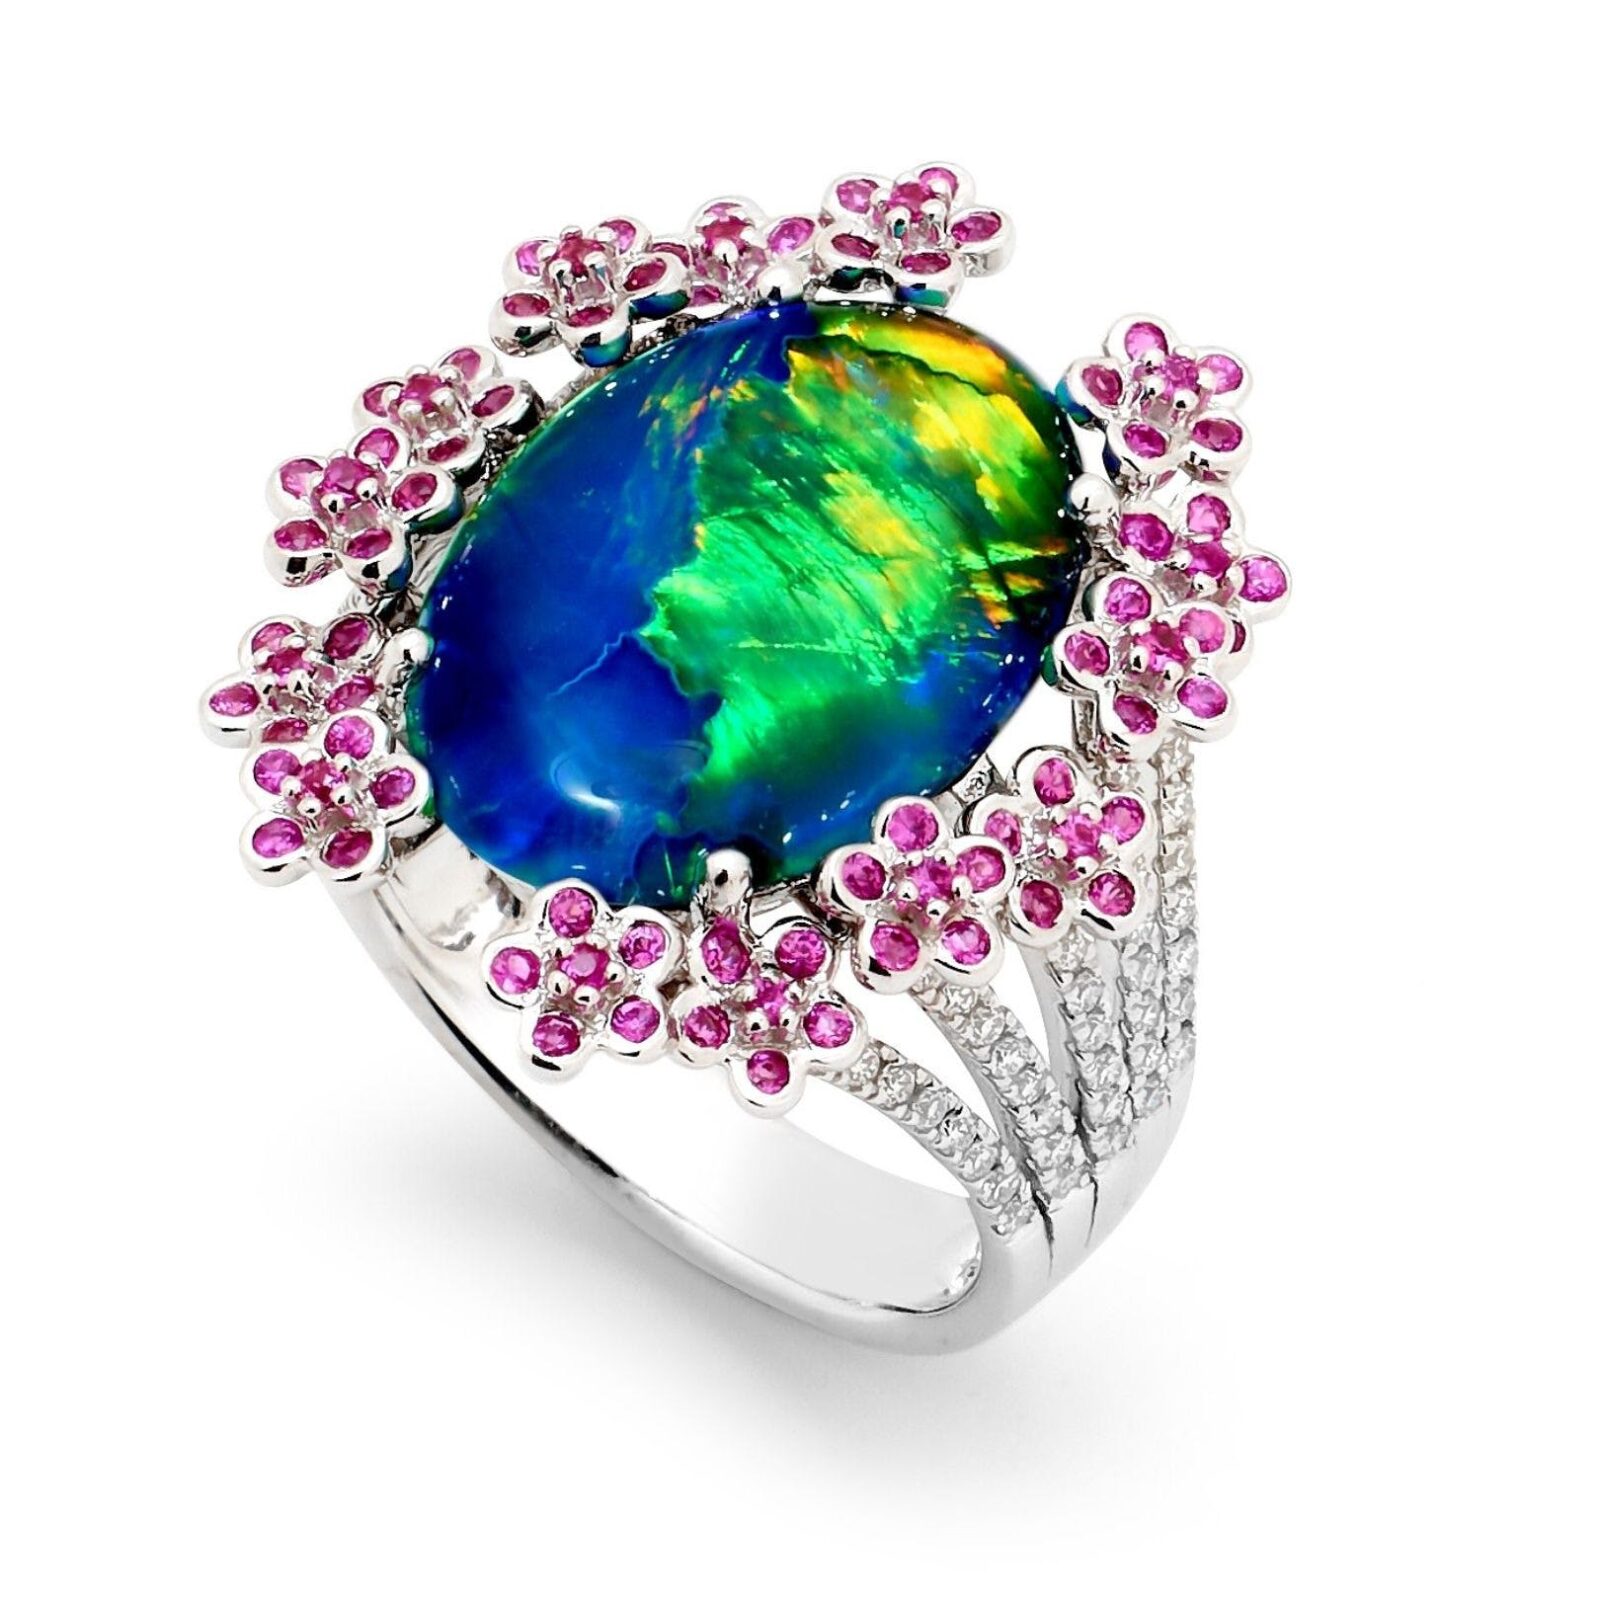 Opal Minded Black Opal Ring from Dream Collection